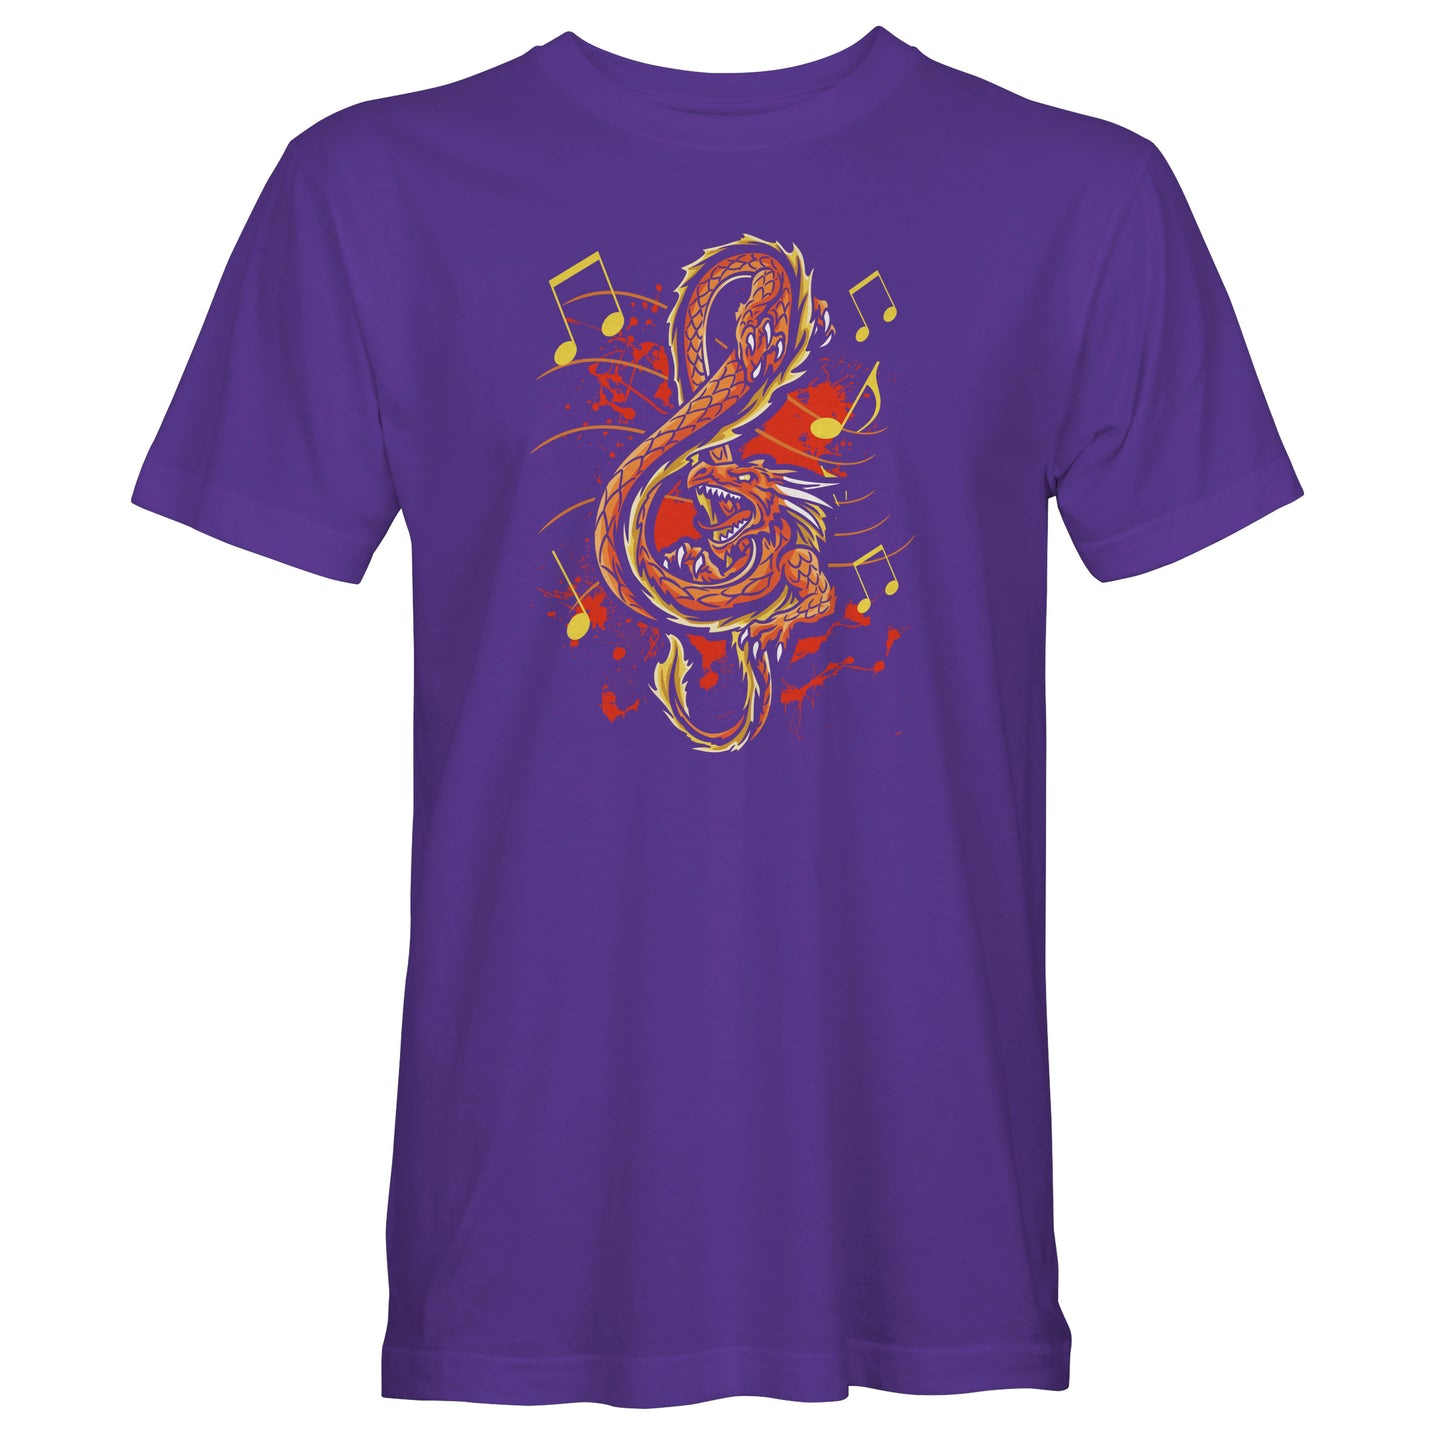 Treble Clef Dragon T-Shirt - Fire Dragon Musical G Clef Symbol Unisex Tee Shirt - For A Musician that Plays or Writes Music